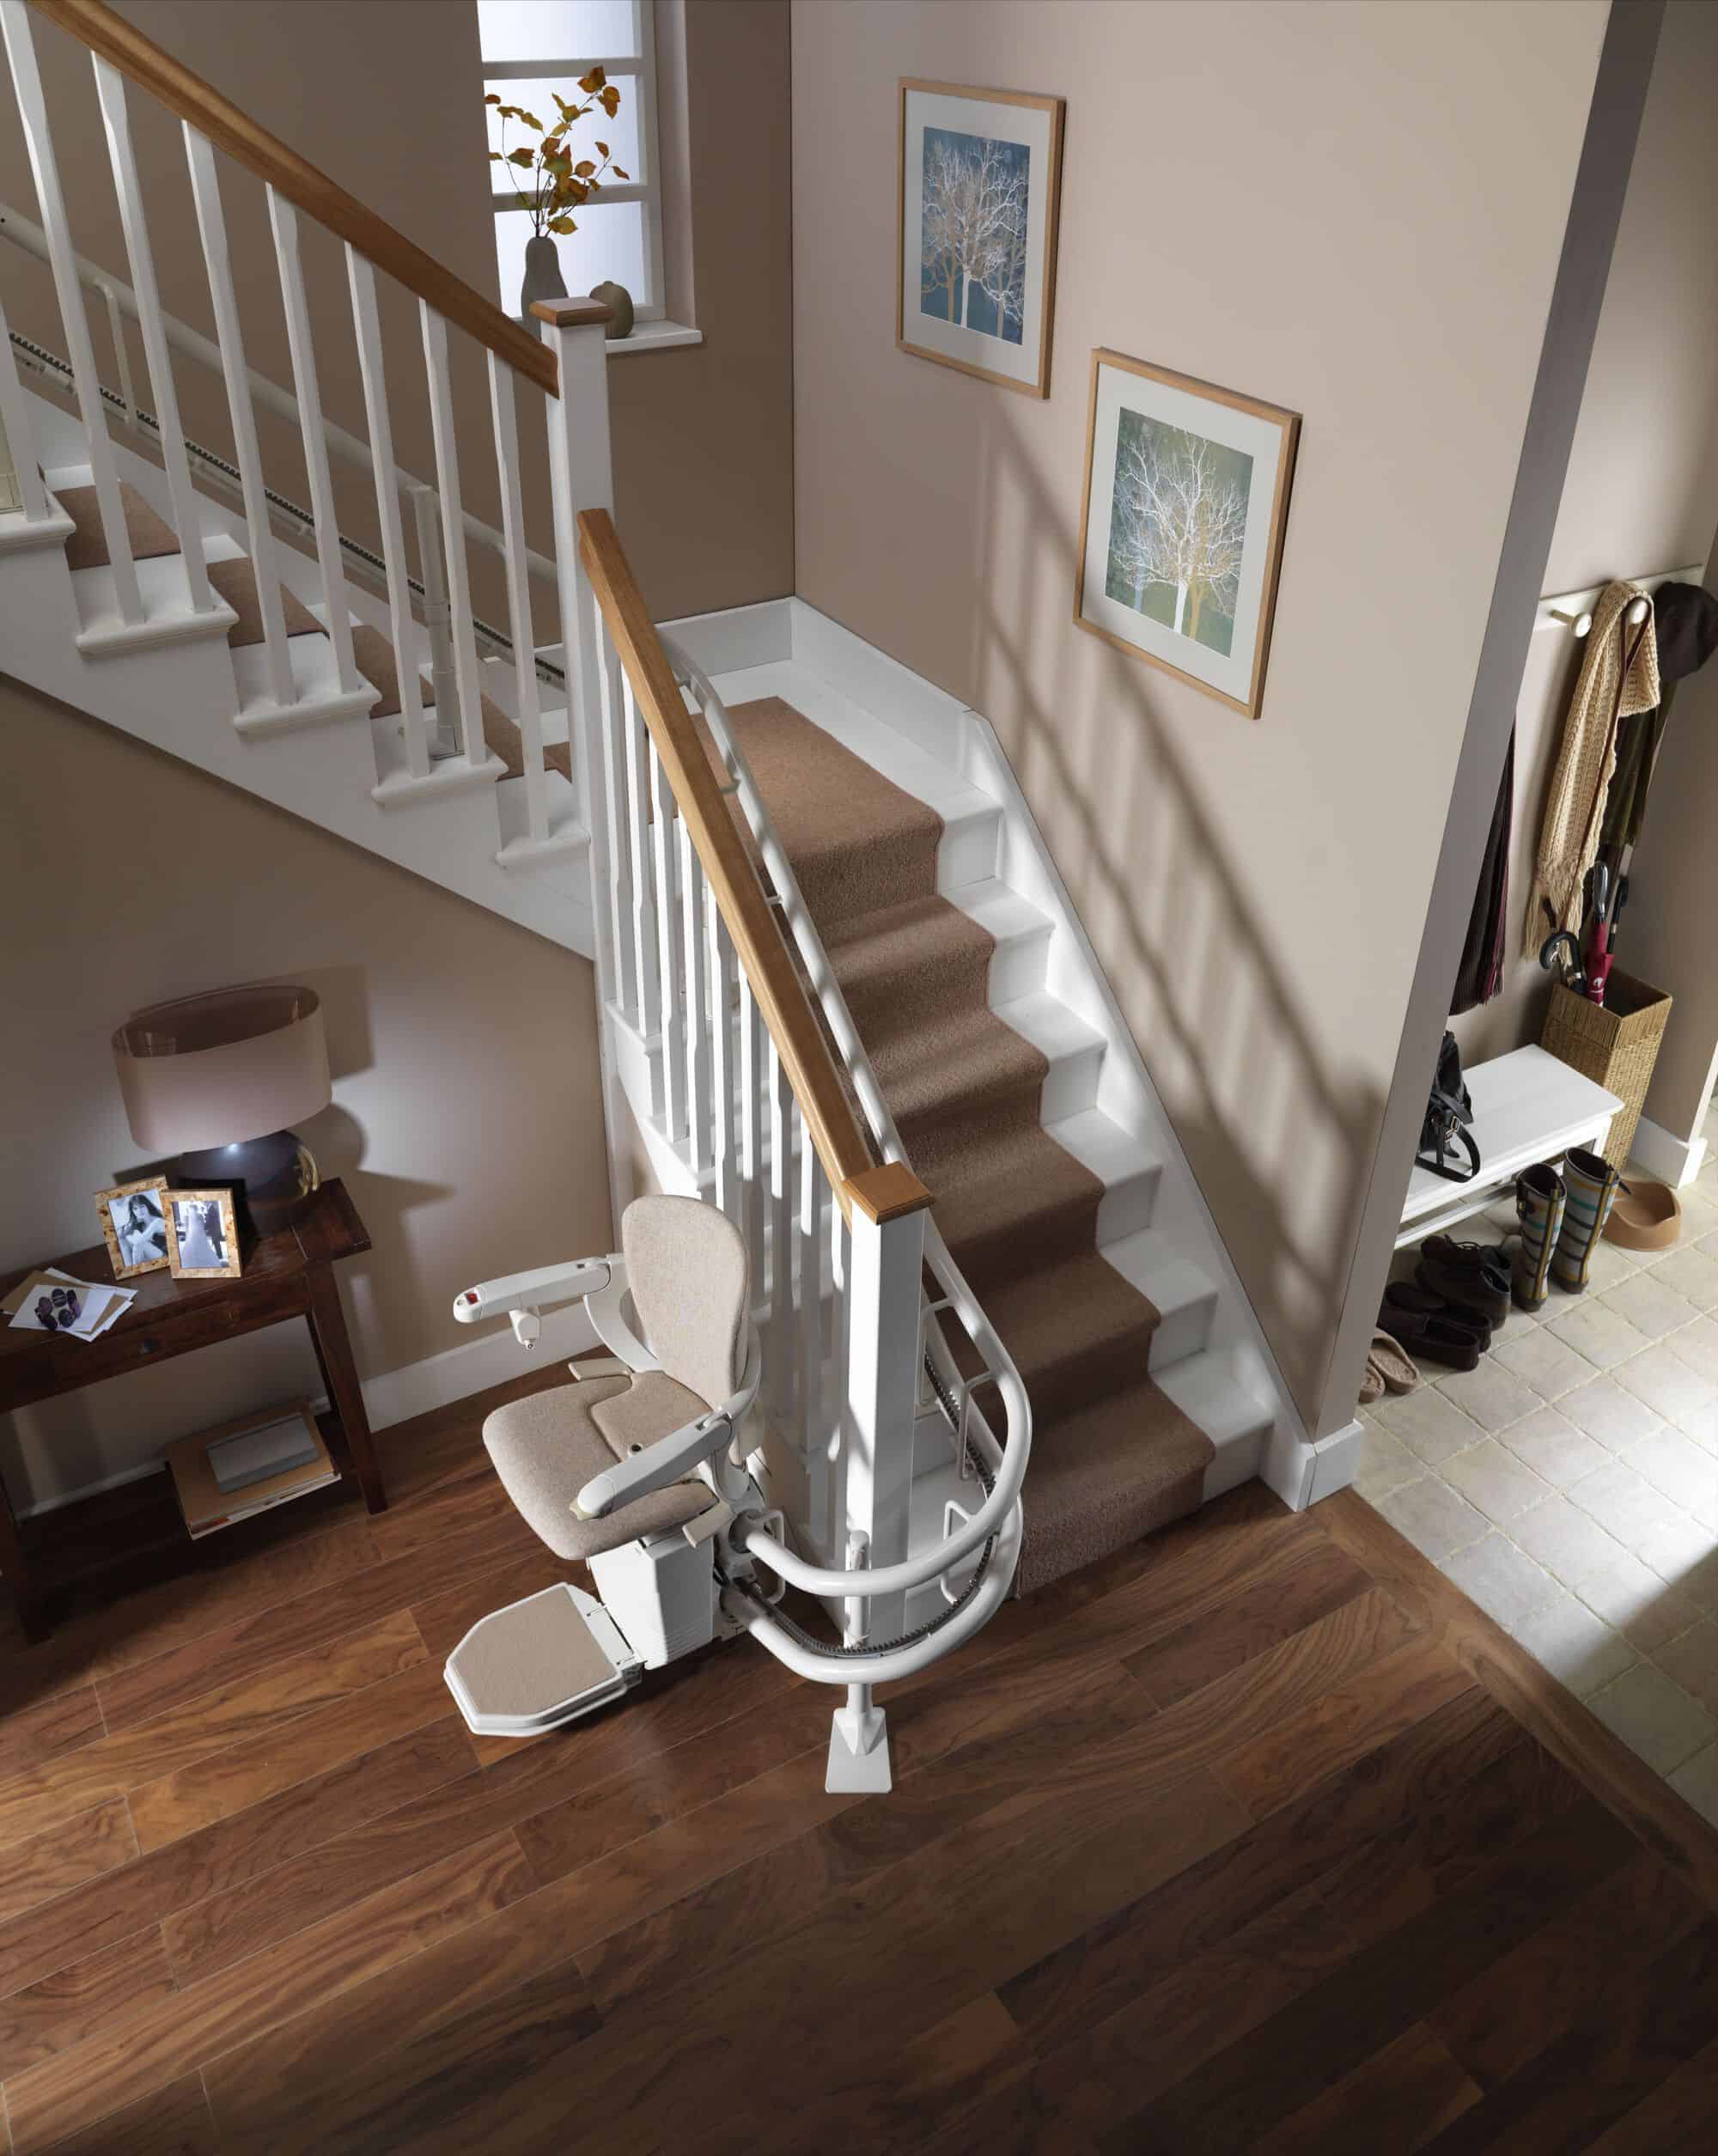 2603133 - Stair Lifts | Stannah Stairlifts